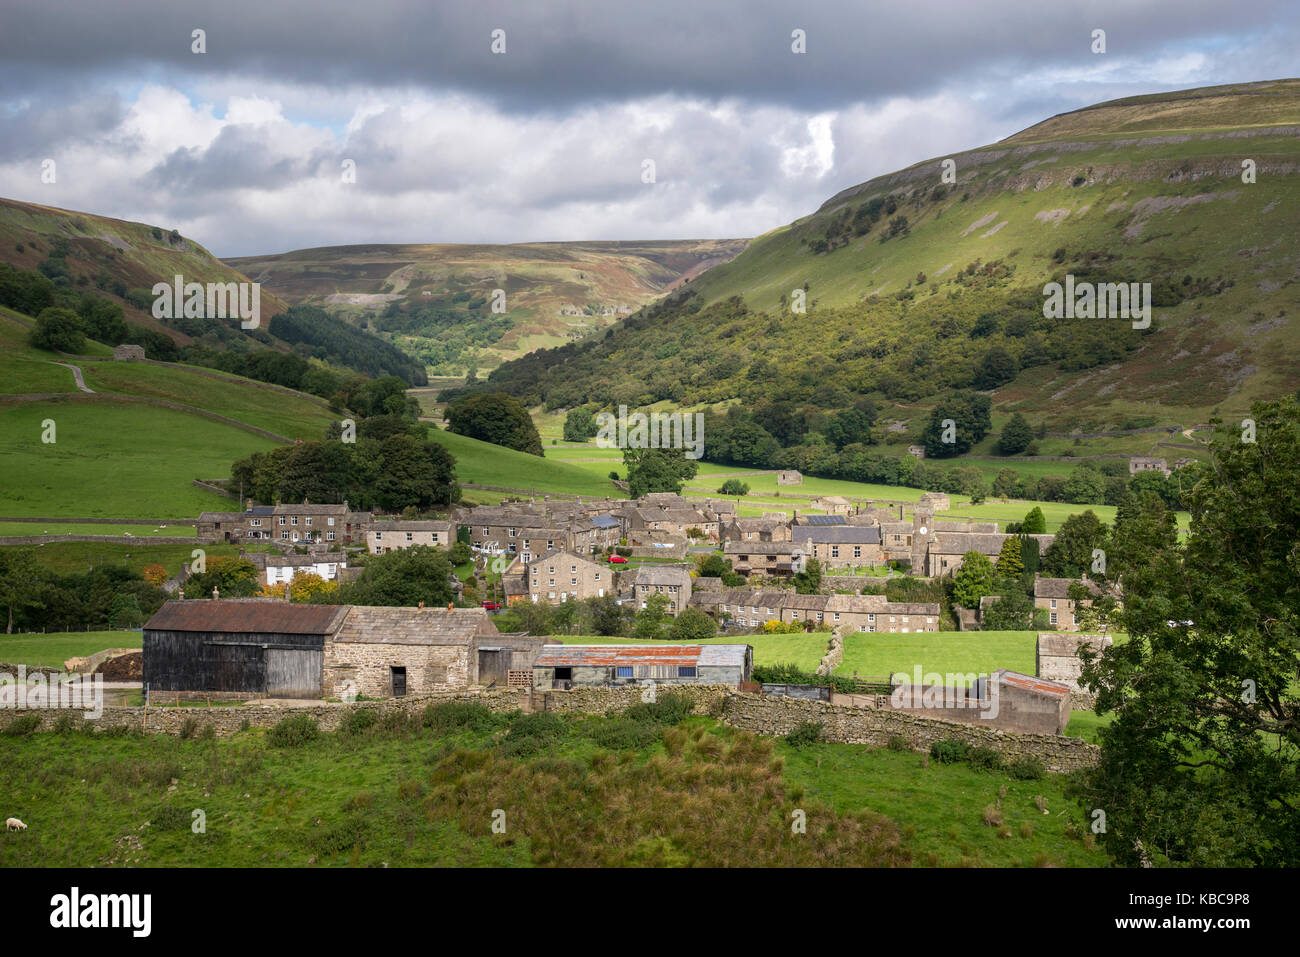 The village of Muker in Upper Swaledale, North Yorkshire, England. Stock Photo